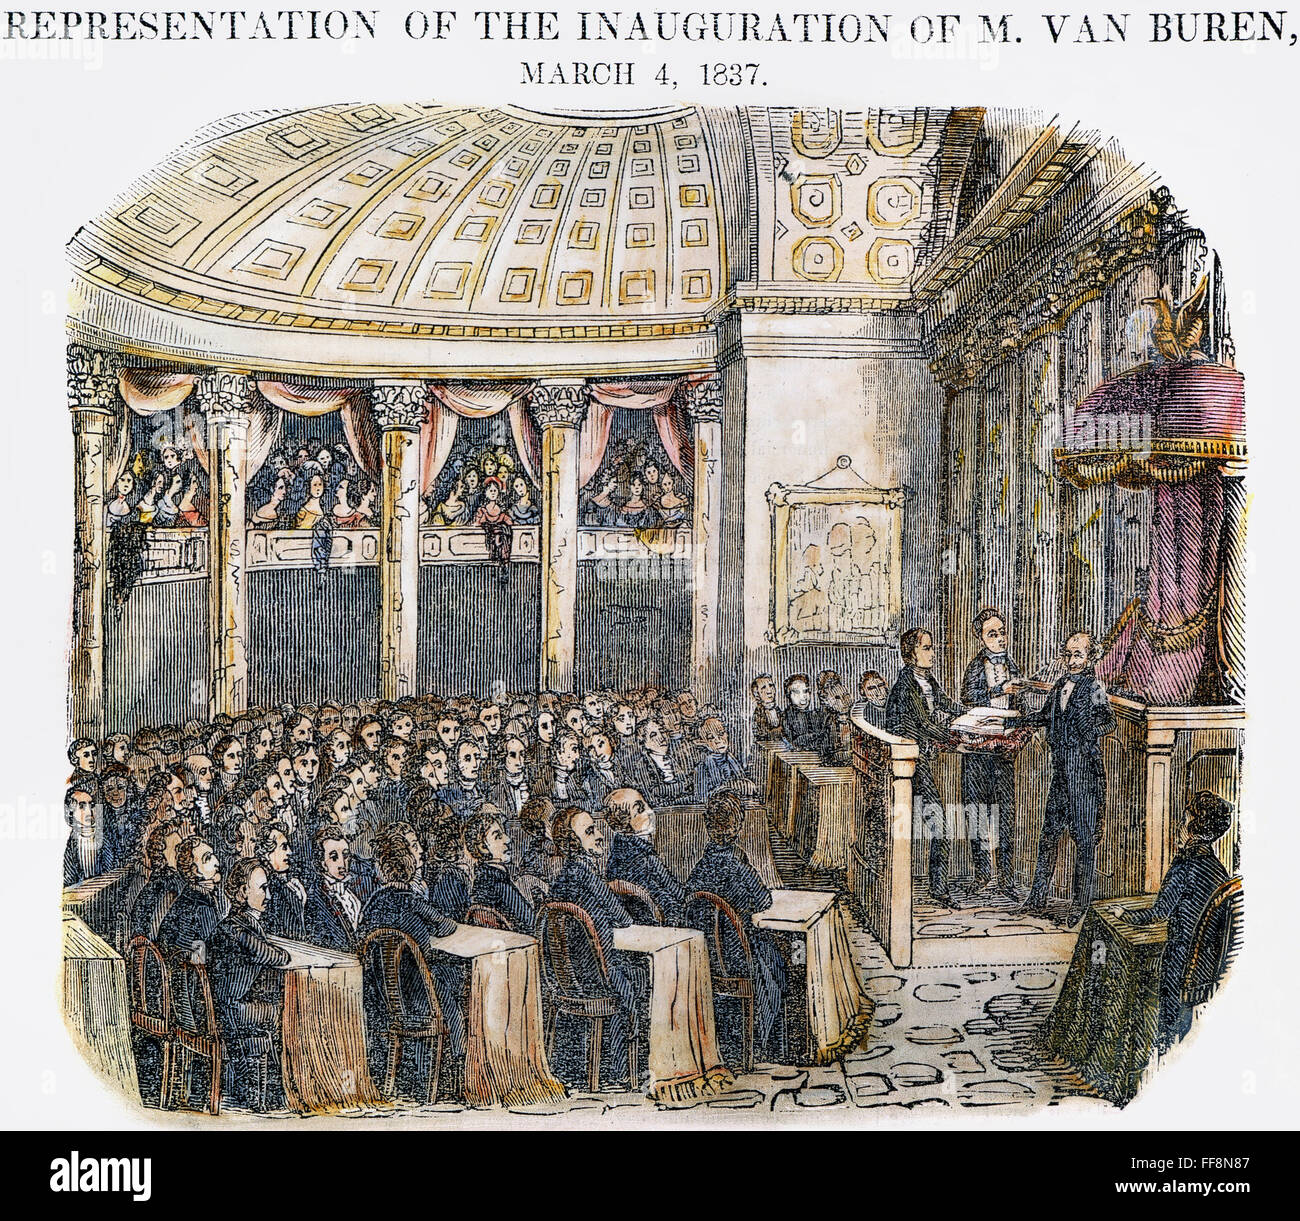 M. VAN BUREN (1837). /nThe inauguration of Martin Van Buren as the 8th president of the United States on 4 March 1837: colored engraving, 1841. Stock Photo